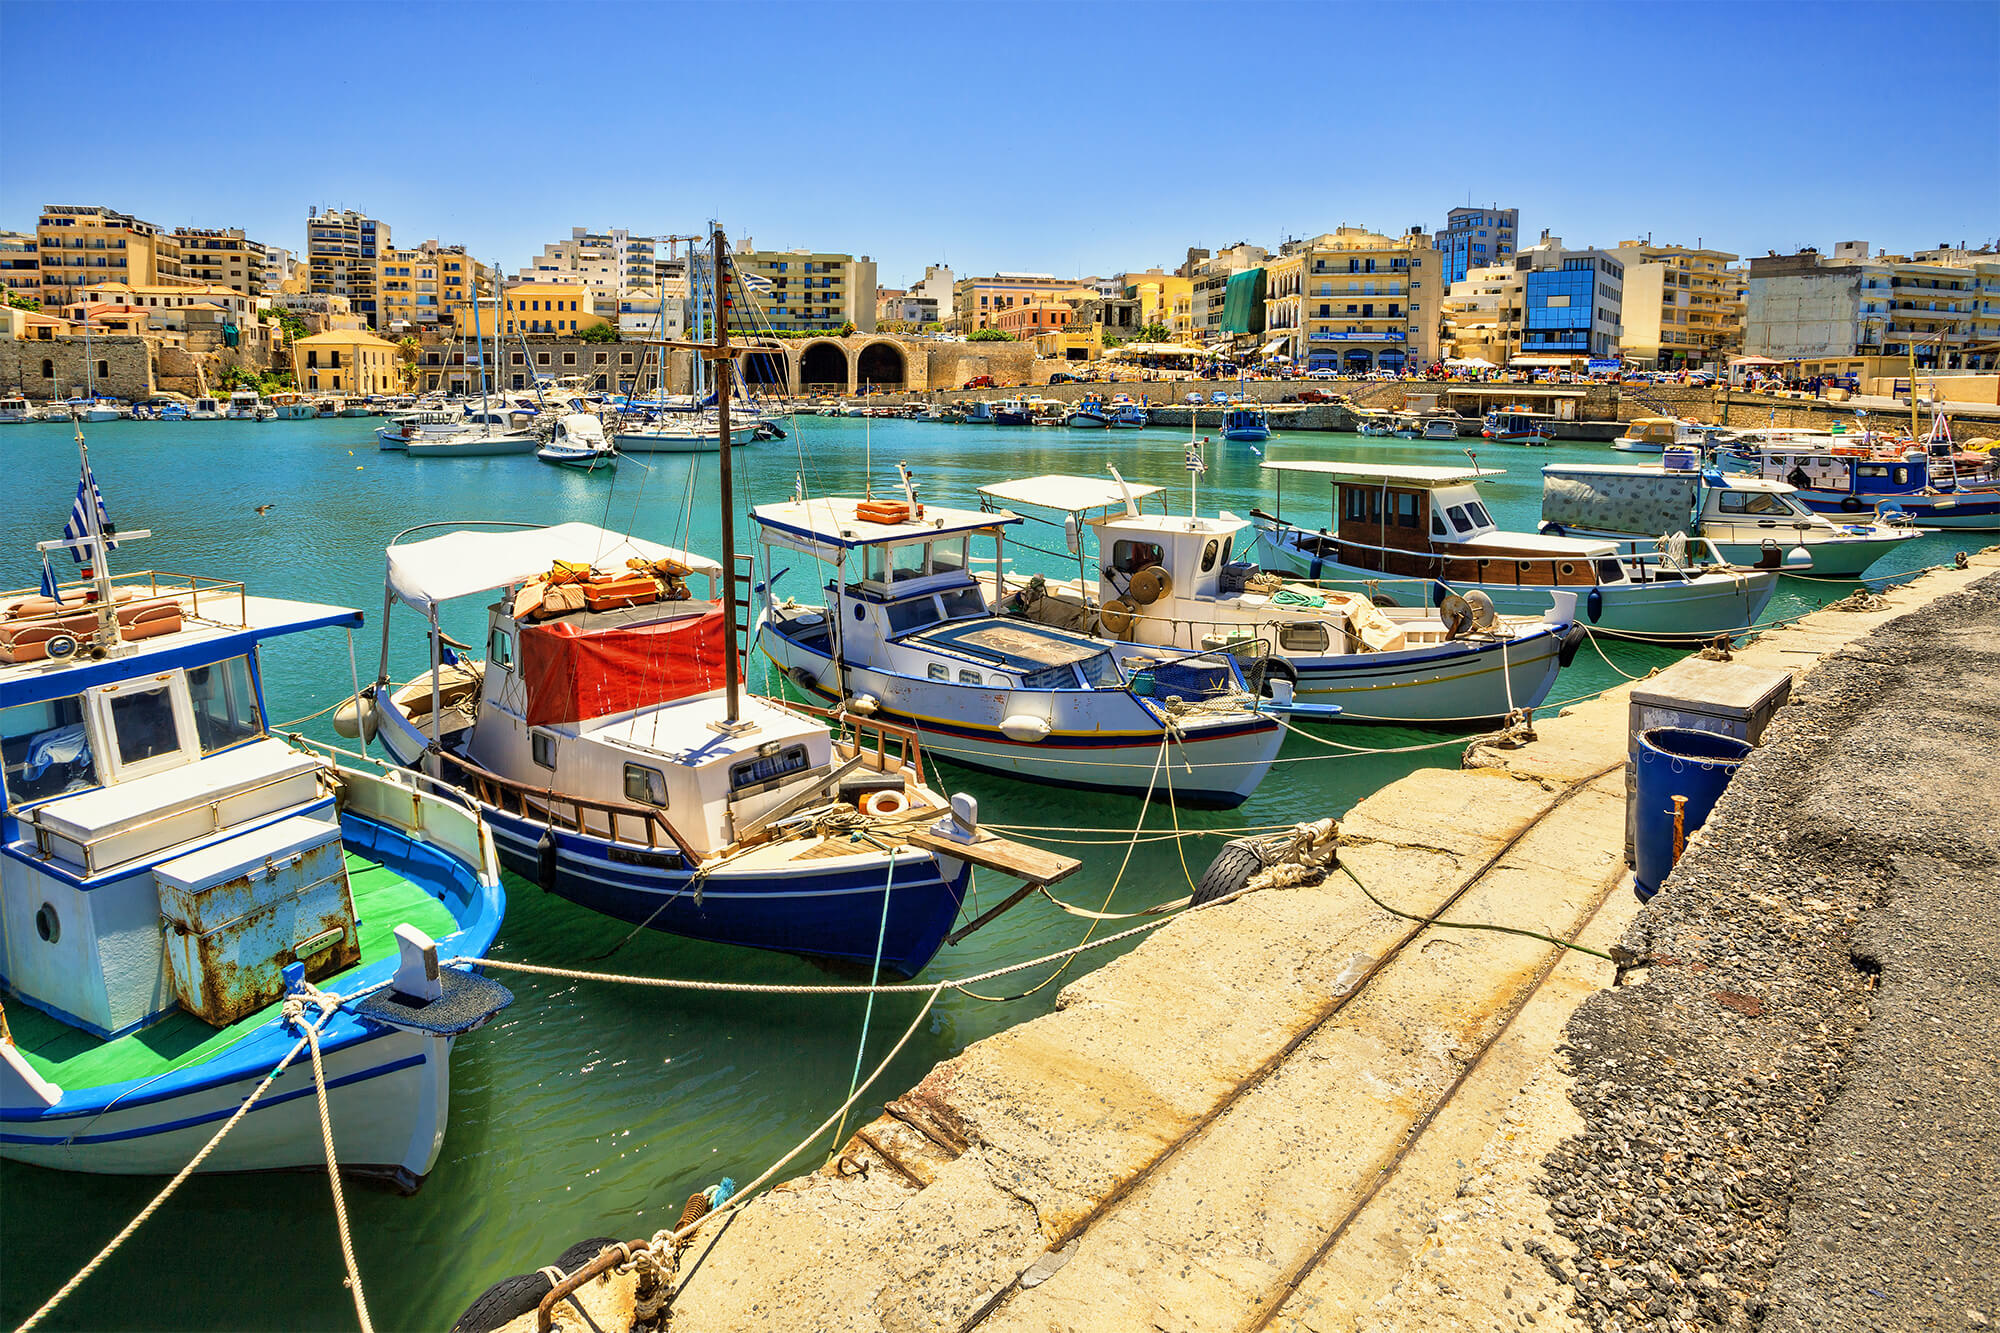 Color photo of boats docked in a port on the Greek island of Crete